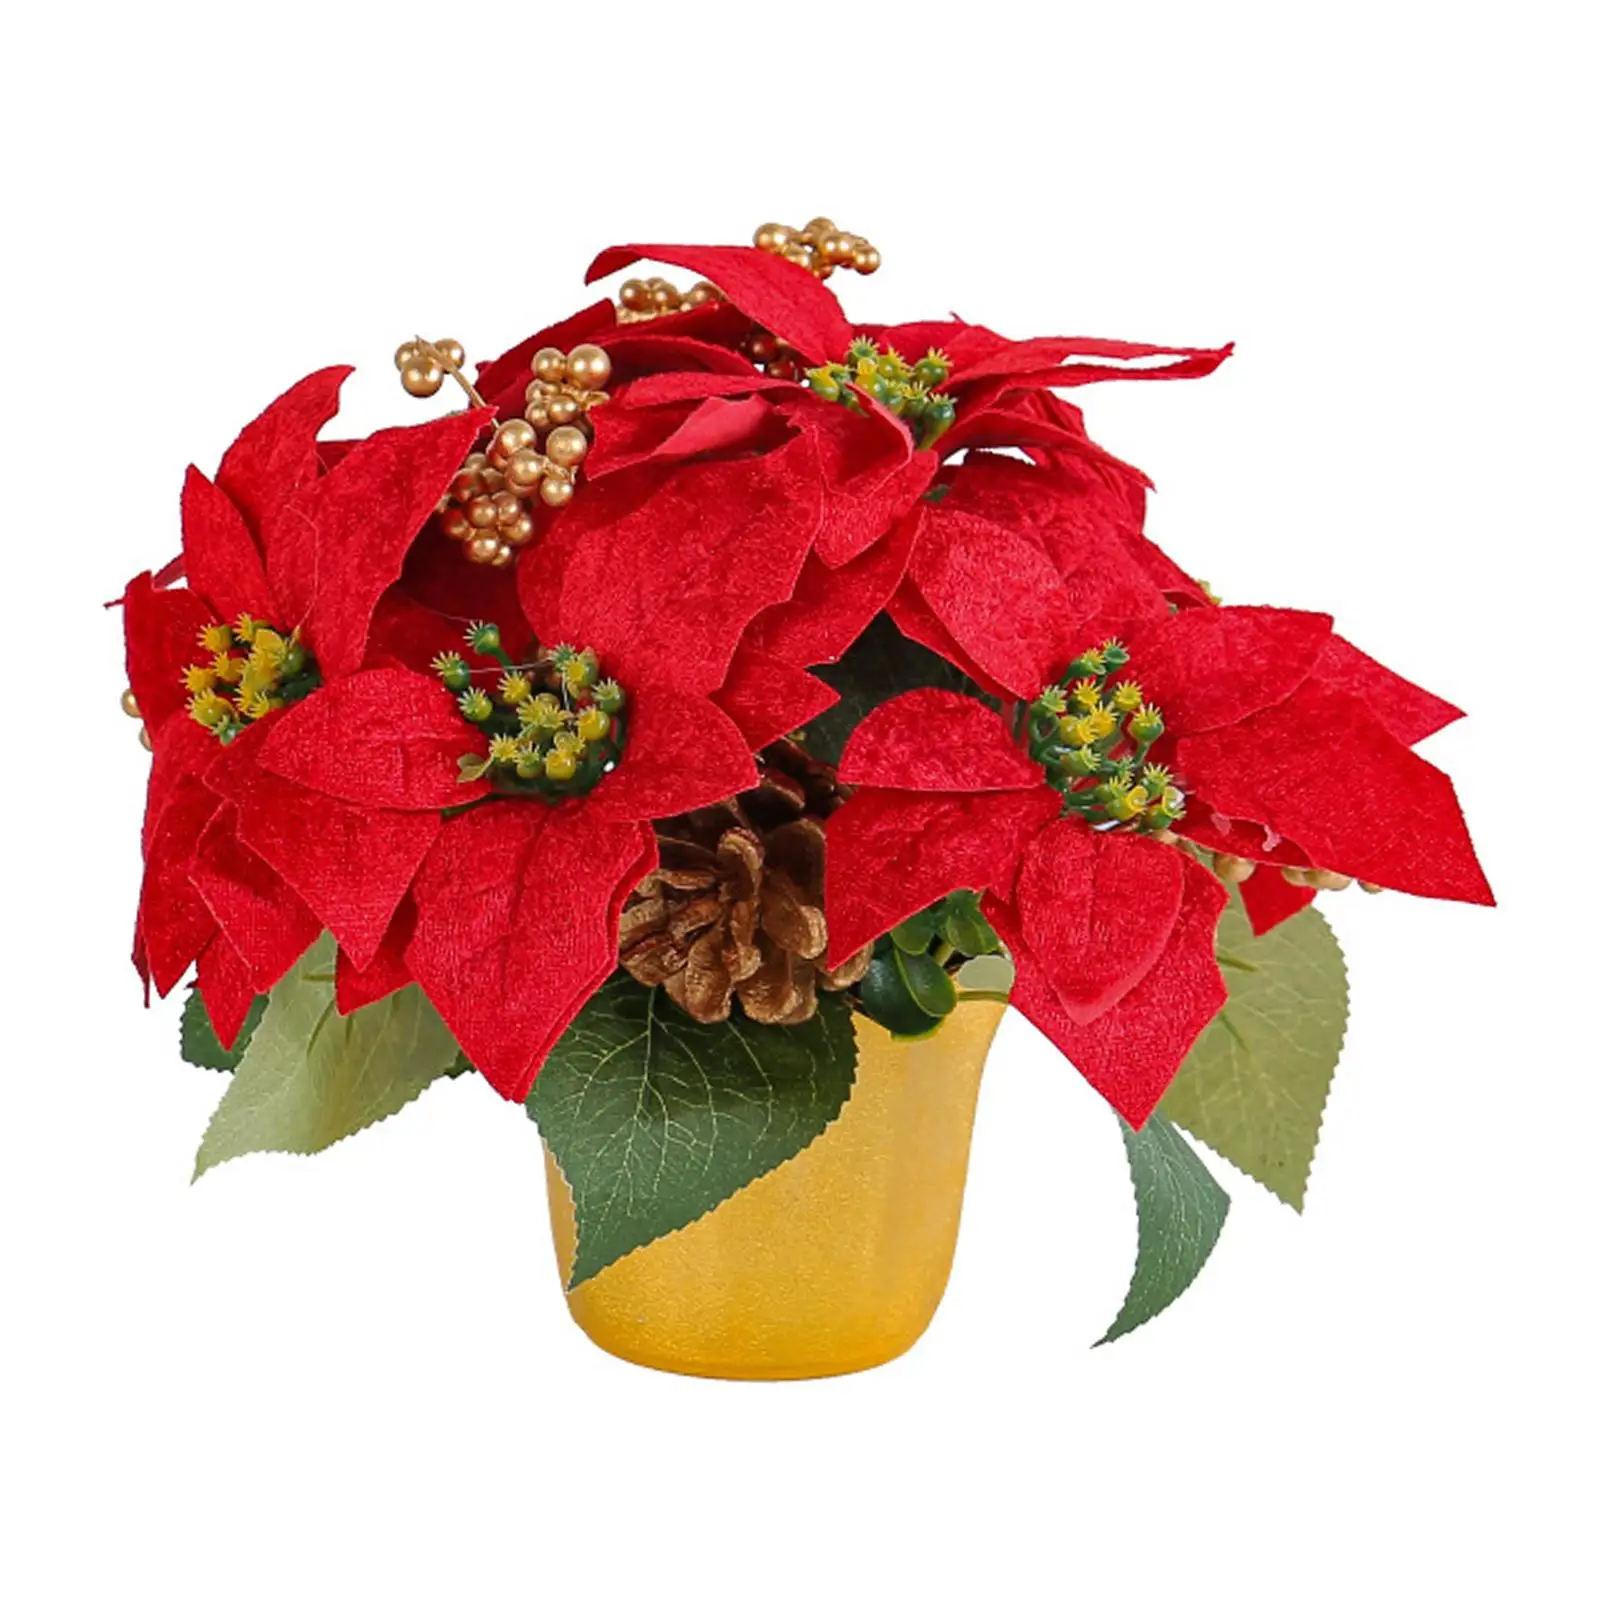 Christmas Artificial Poinsettia Plant Potted Red Poinsettia Decorative Artificial Flower for Holiday Xmas Garden Tabletop Indoor